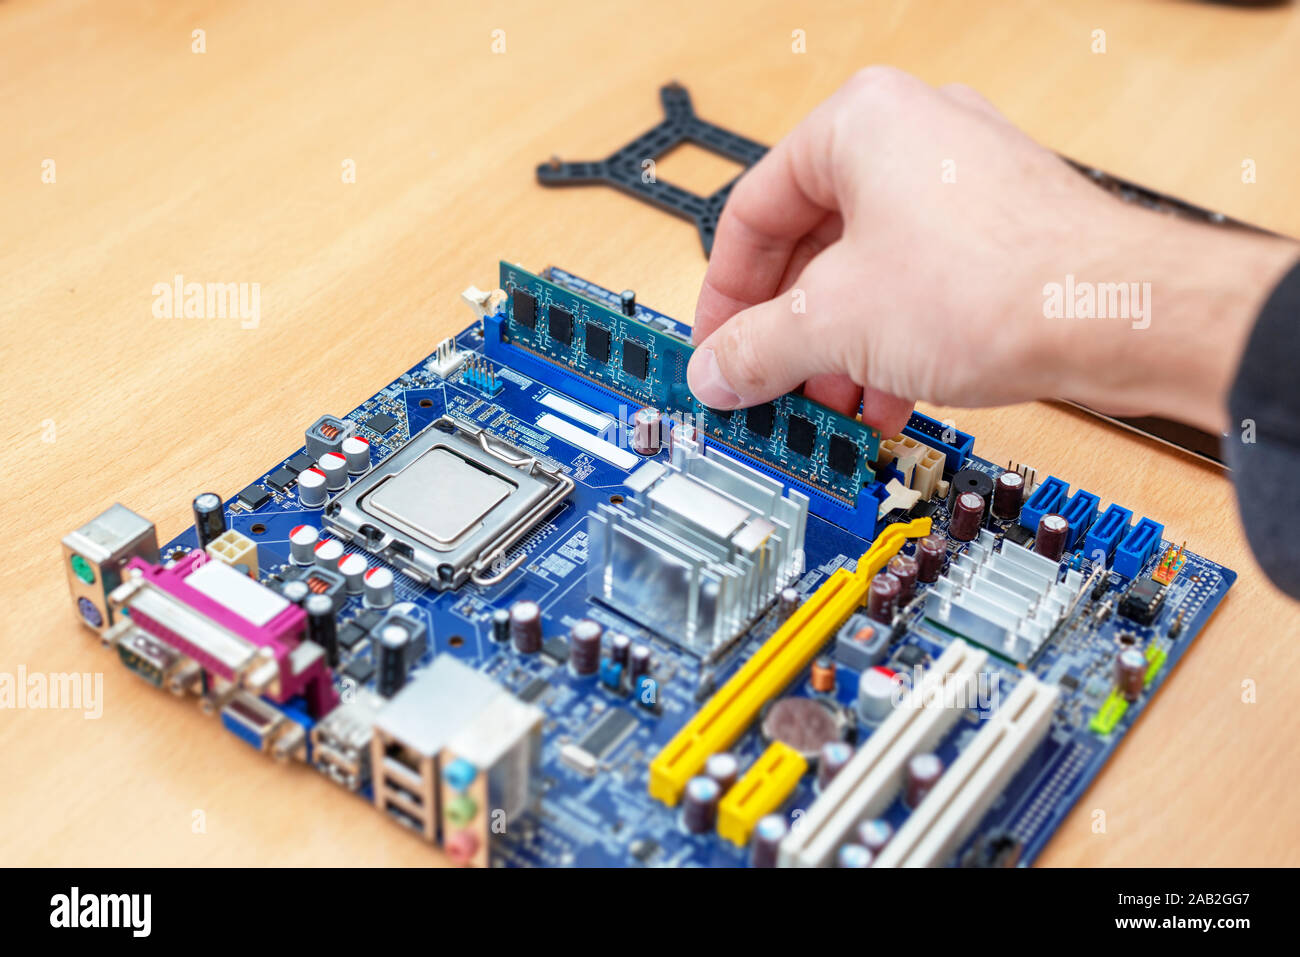 Installing DDR memory on motherboard. Hand pushes the module into the slot provided on the system board. Stock Photo